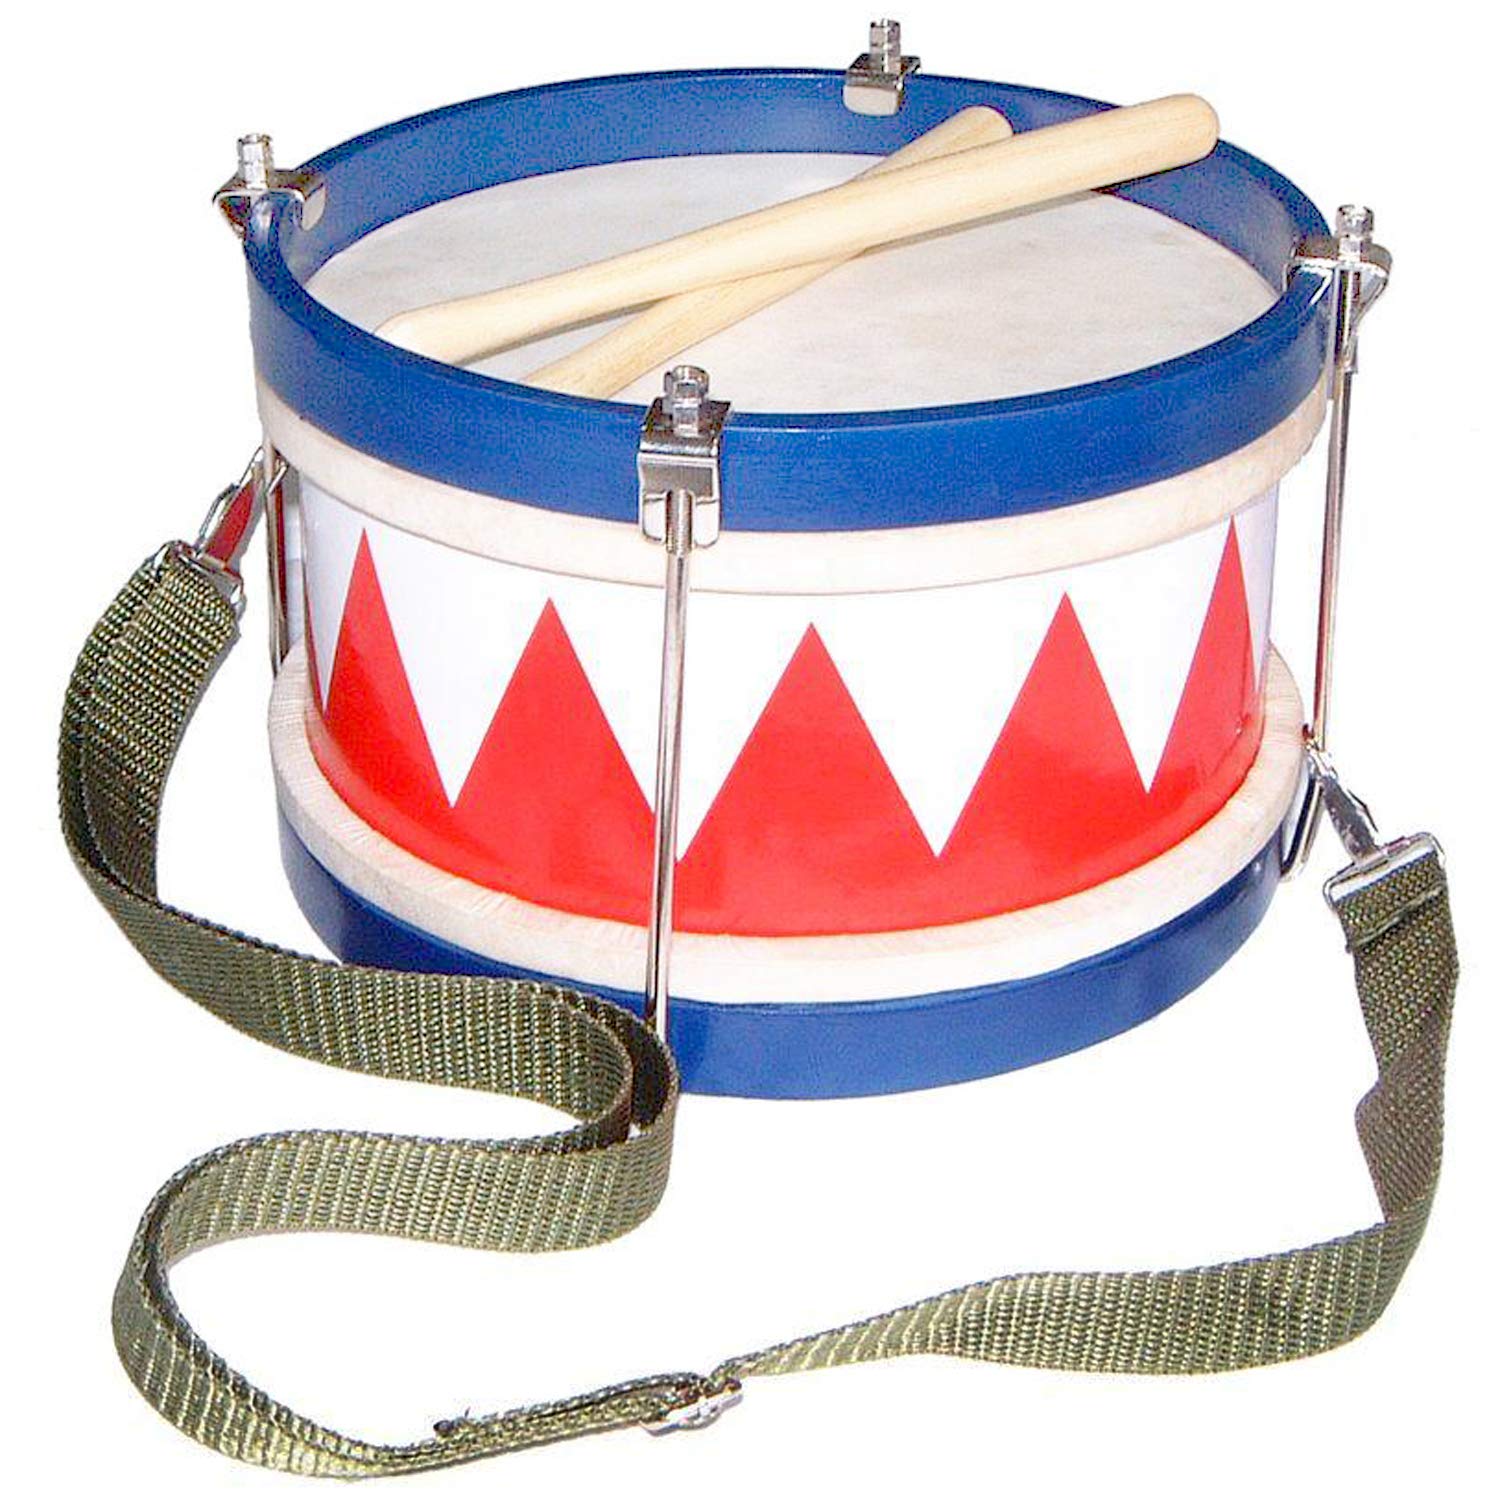 A white drum with a red triangle pattern and a blue rim. 